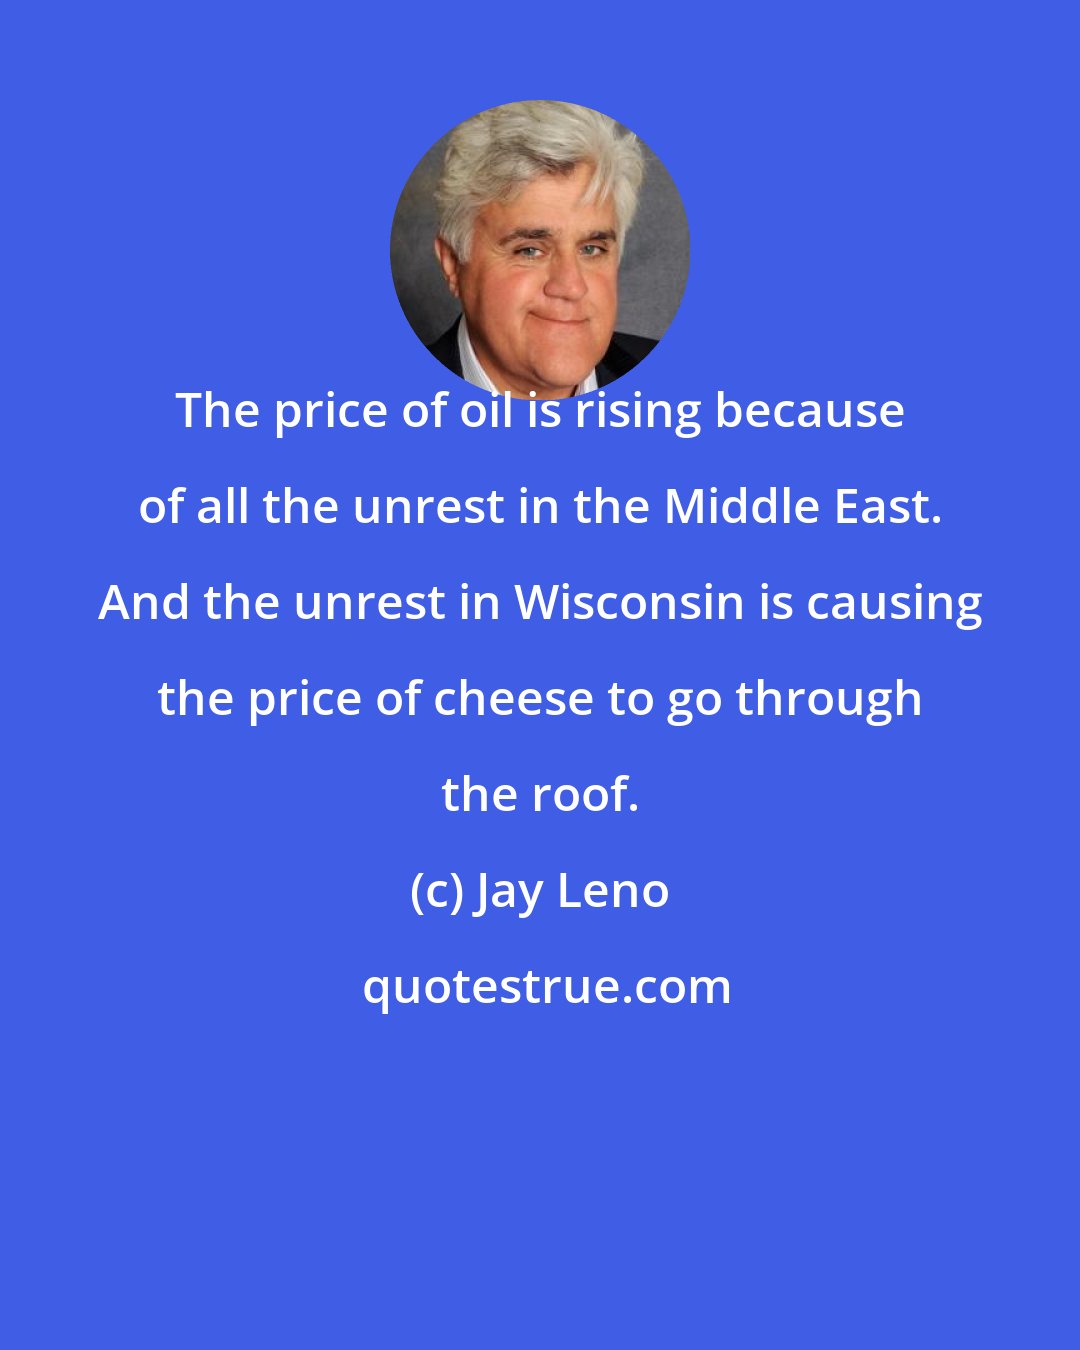 Jay Leno: The price of oil is rising because of all the unrest in the Middle East. And the unrest in Wisconsin is causing the price of cheese to go through the roof.